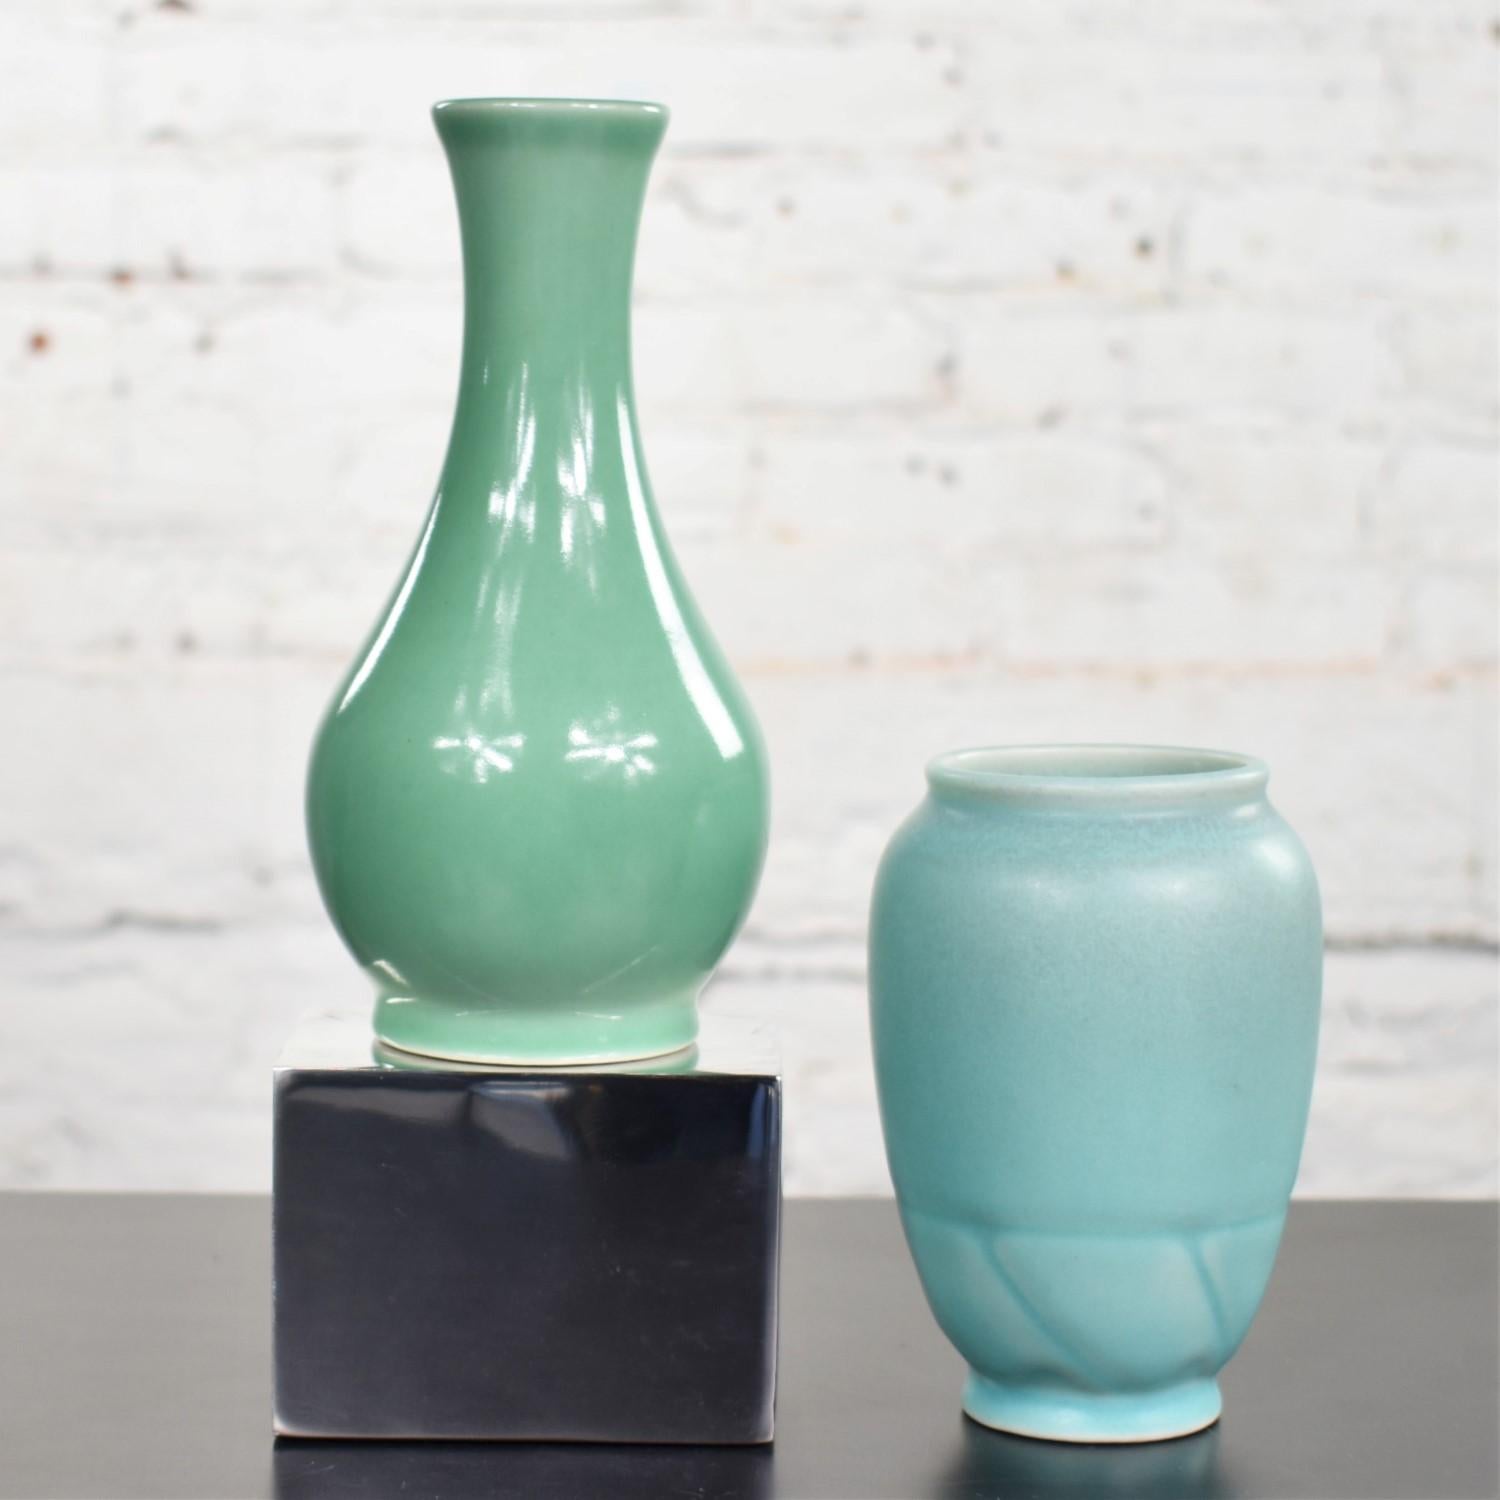 American Pair of Petite Rookwood Pottery Arts & Crafts Vases 1 Sea Green and 1 Turquoise